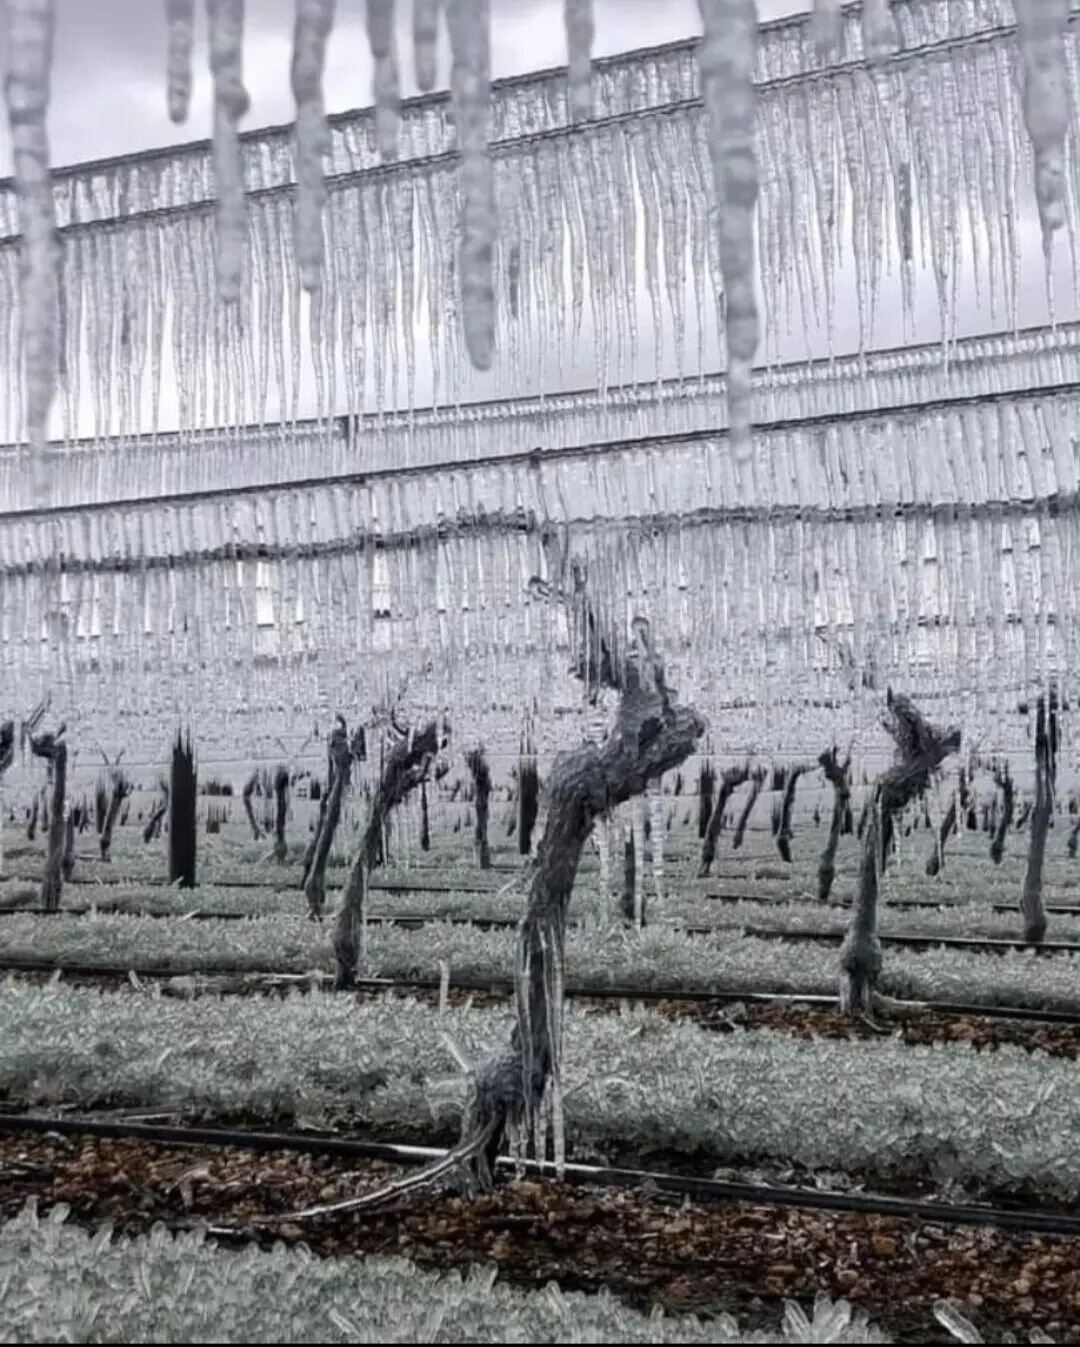 Best of luck to everyone frost fighting recently! These beautiful photos are from @mcarthurridgewine down in Central Otago ❄🤞